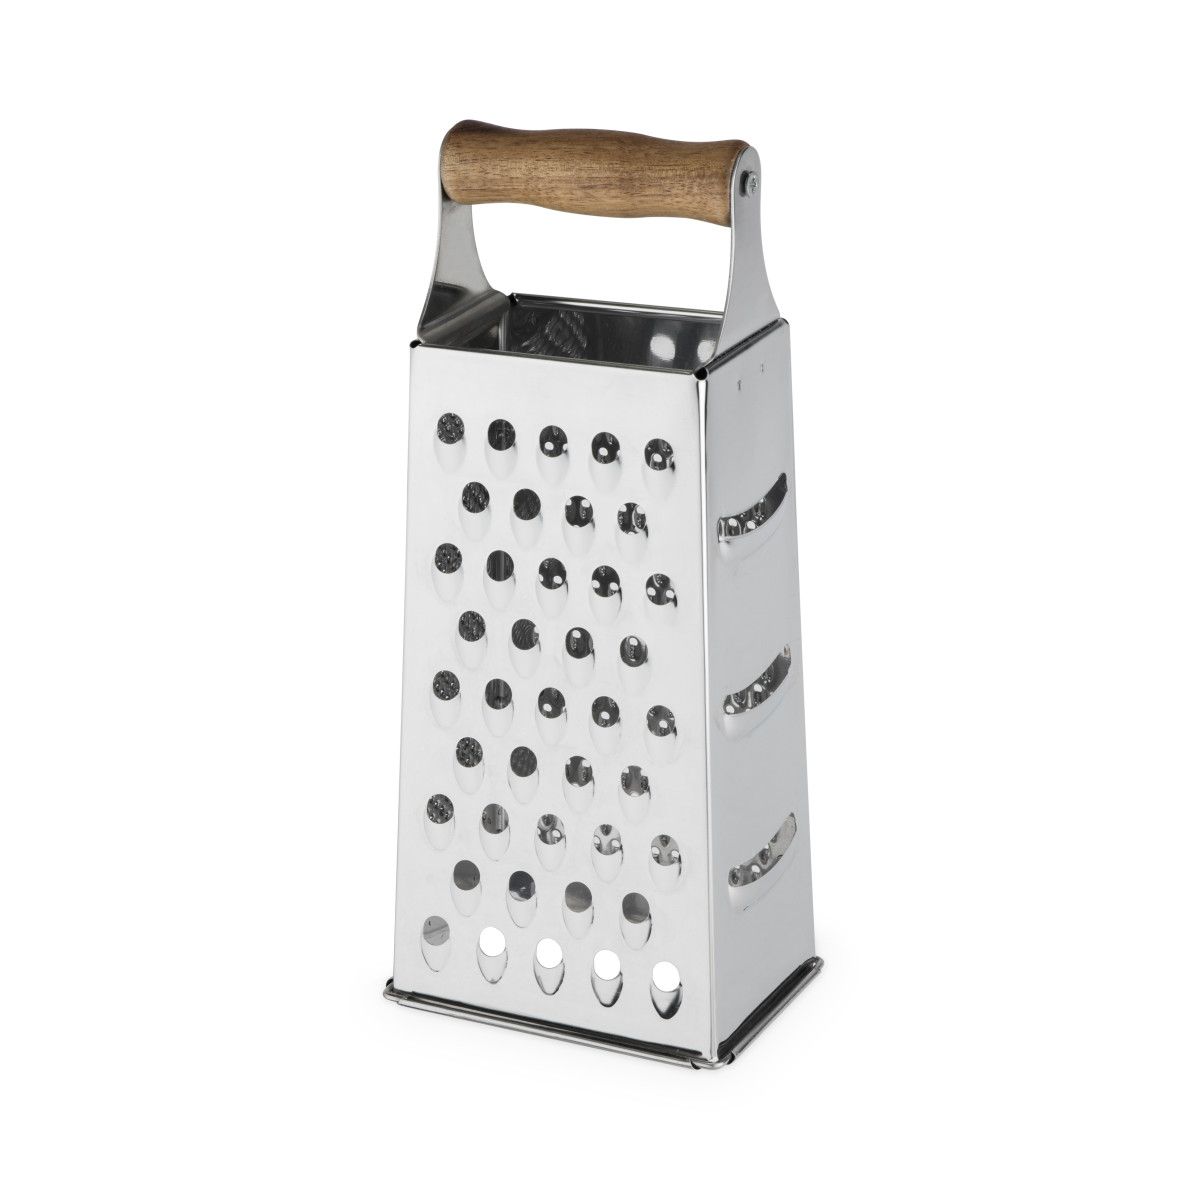 Stainless Steel Cheese Grater Wooden Shredder Cheese Grater Case